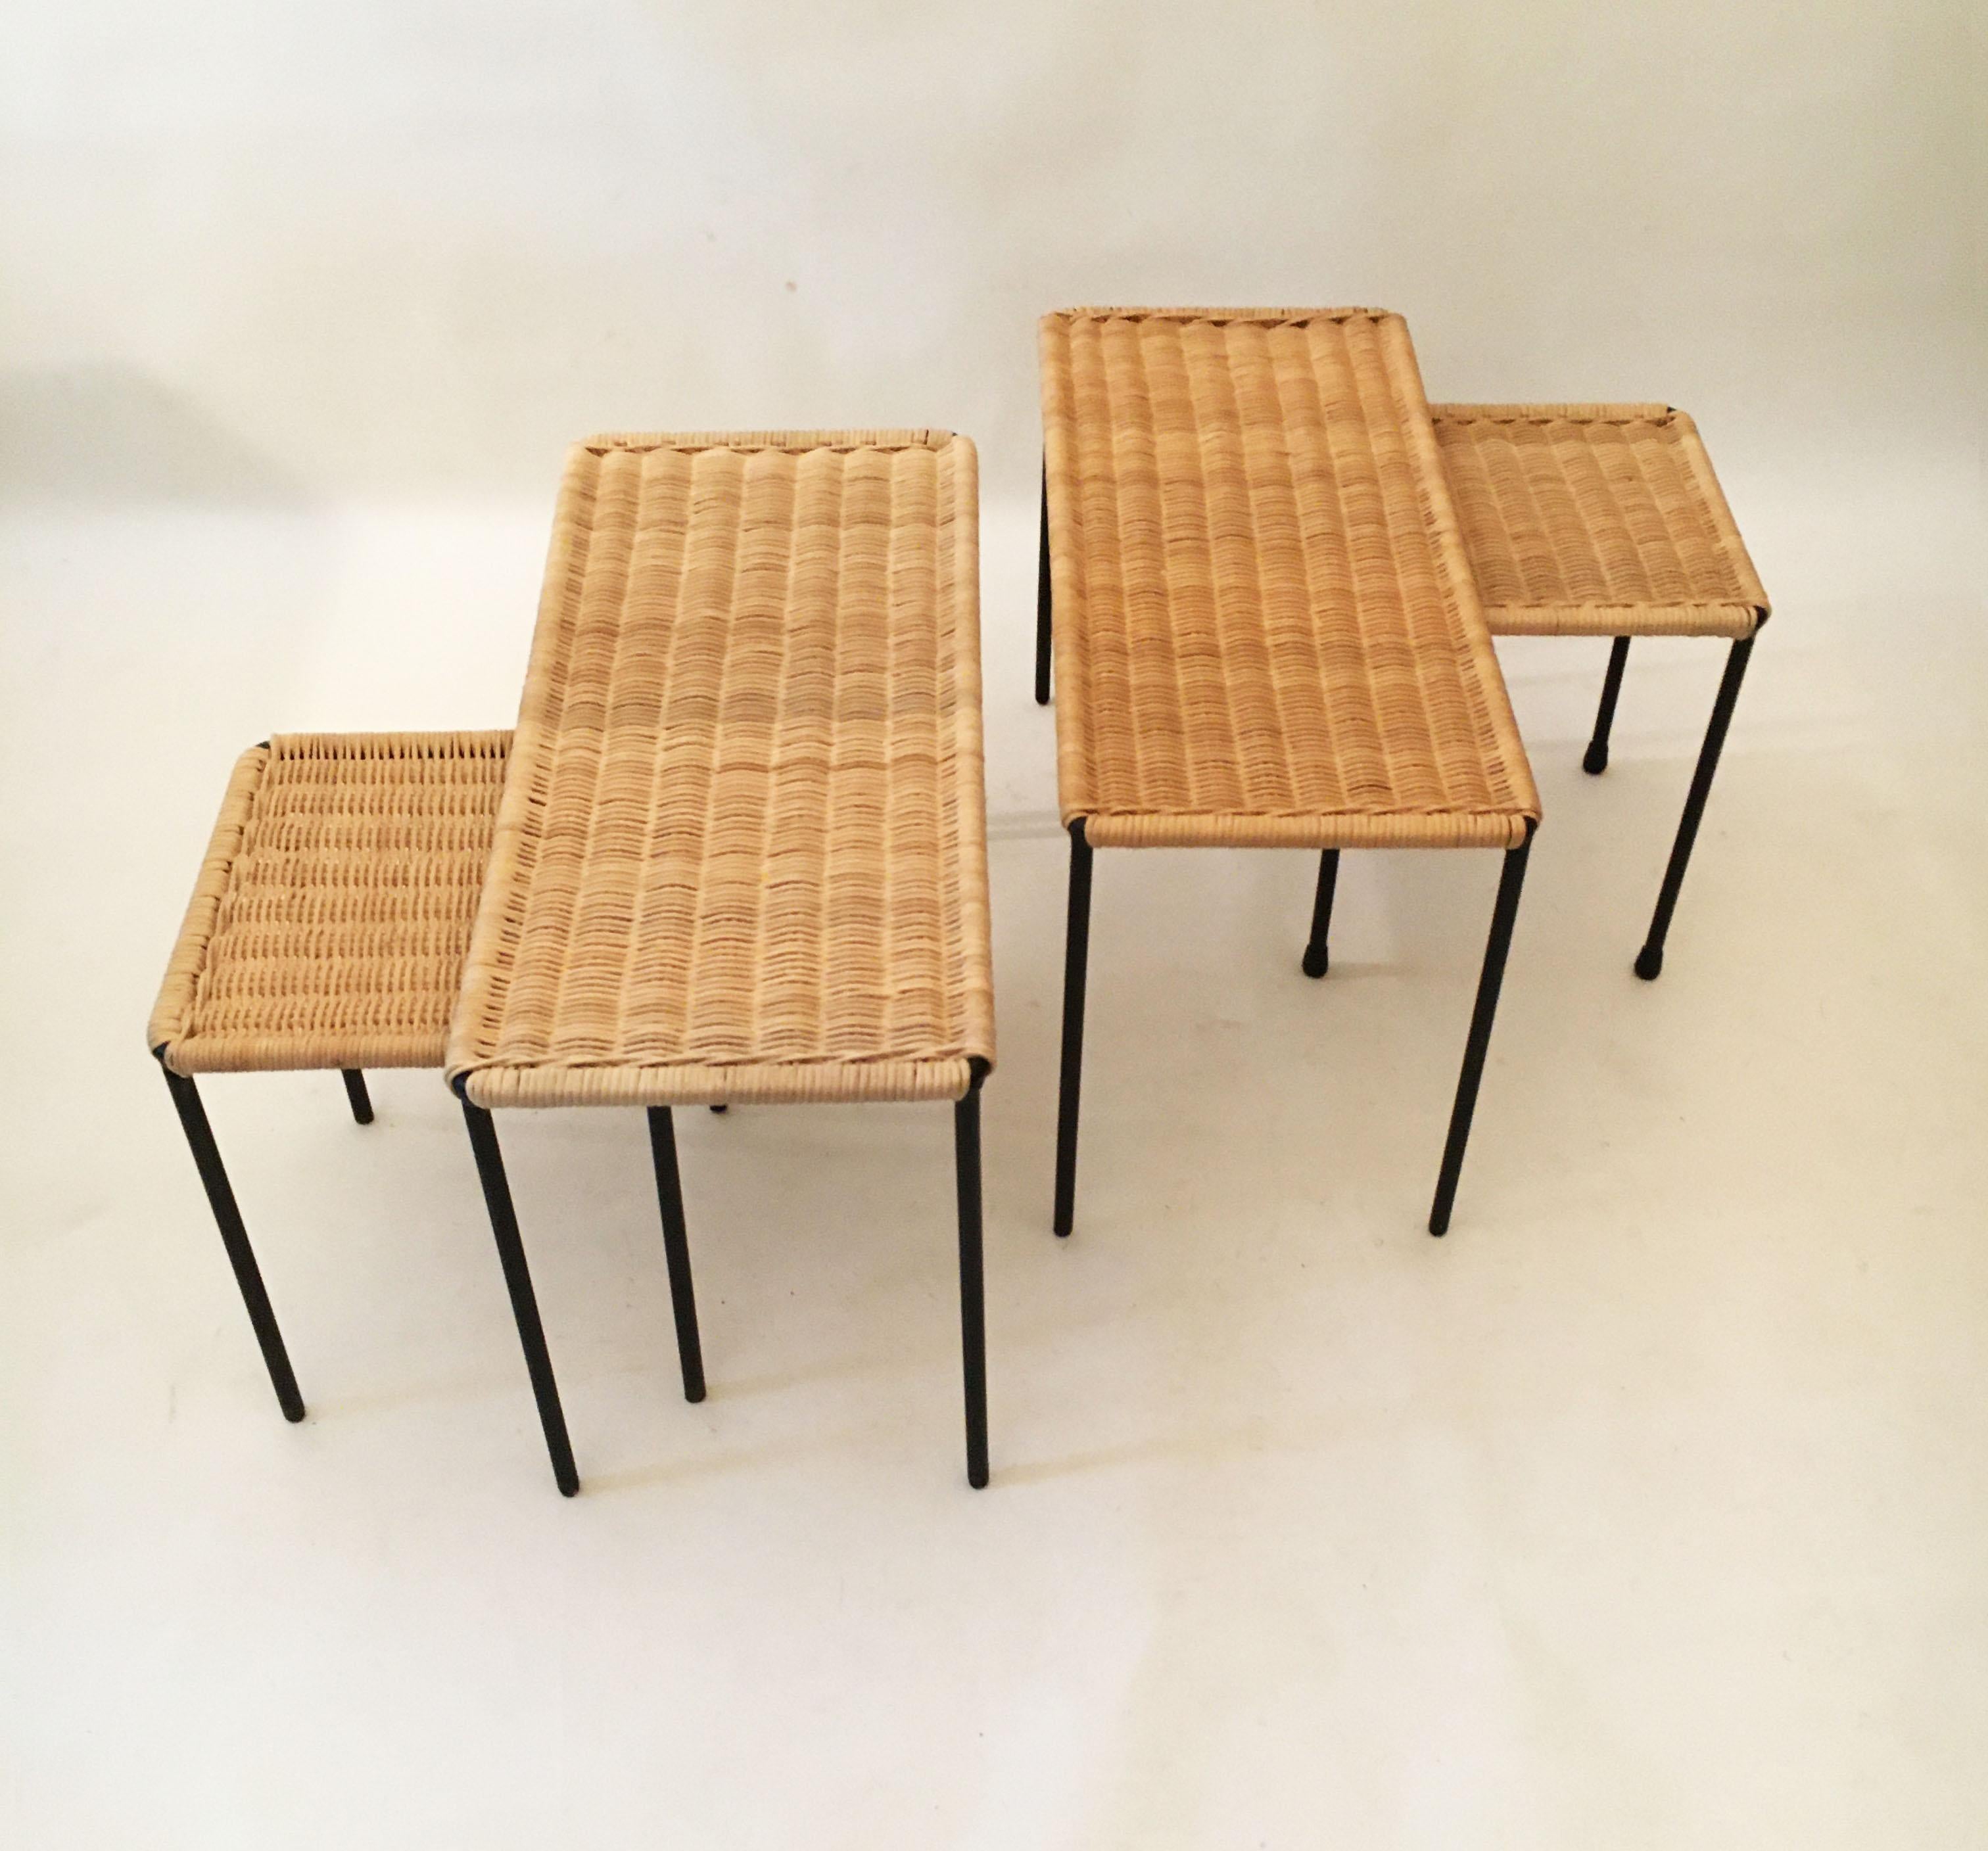 Carl Auböck II Woven Wicker table collection, Set of four, circa 1950

A rectangular table collection designed and made by Carl Auböck II, Vienna, Austria, circa 1950. The table's frames are made from slender steel bars which has been lacquered in